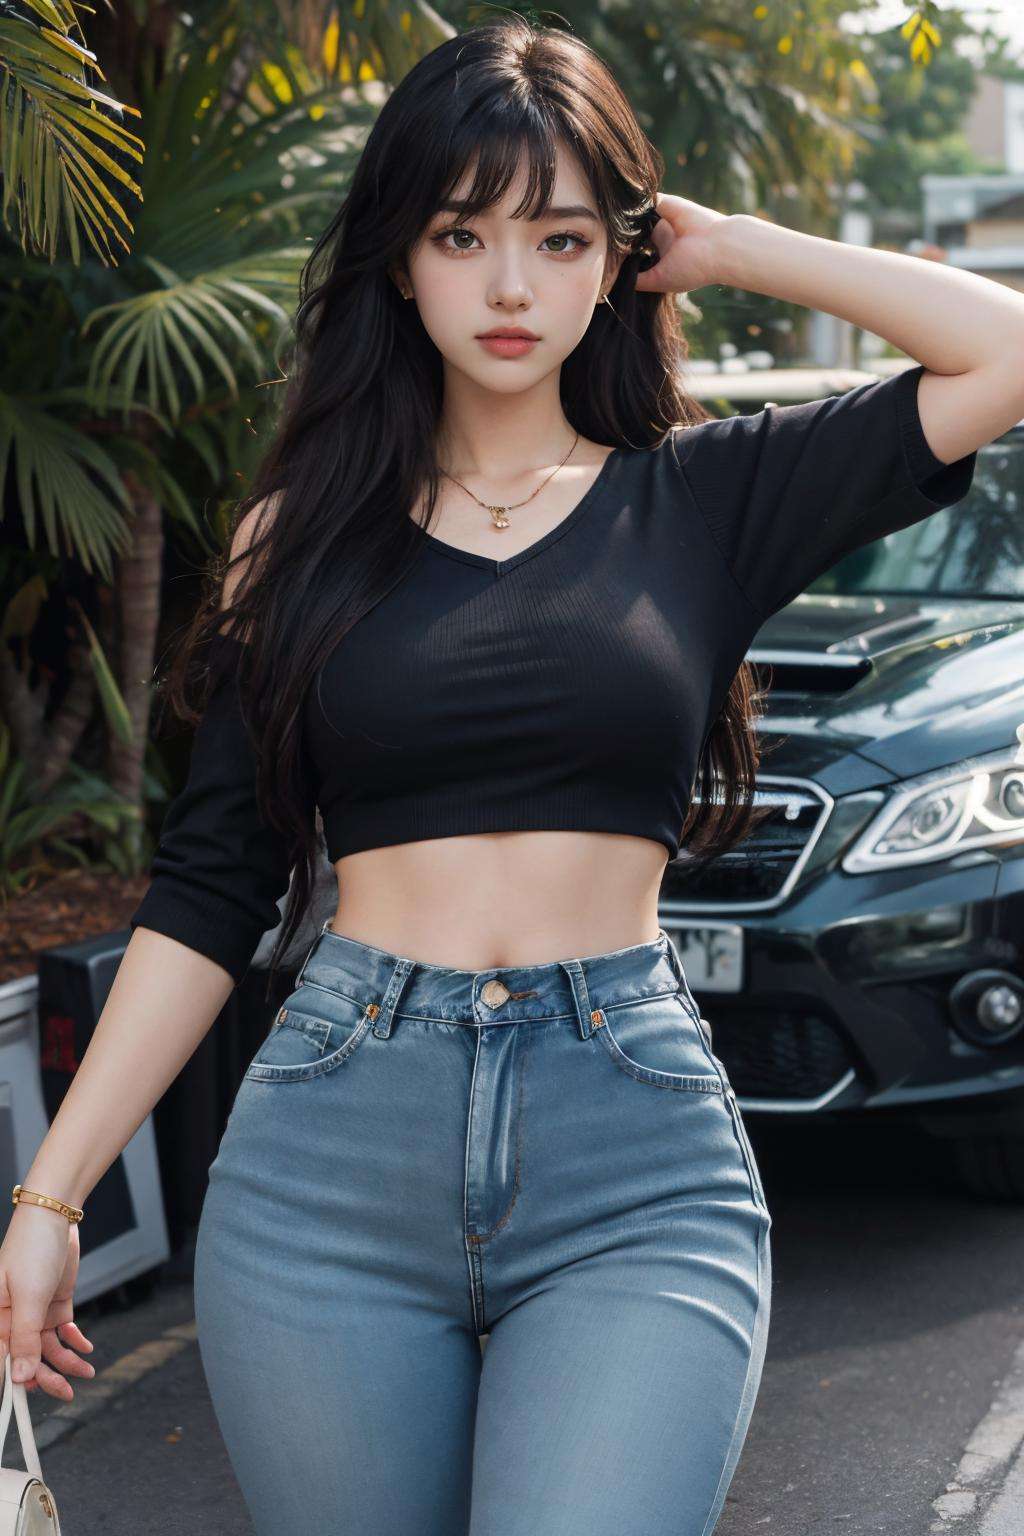 masterpiece,ultra realistic,32k,extremely detailed CG unity 8k wallpaper, best quality,(spring day ),lady ,necklace ,eardrop, The Great Barrier Reef, Australia, ( Lime green Going for a retro look with high-waisted jeans and a crop top ) , Jet black hair long hair with bangs ,